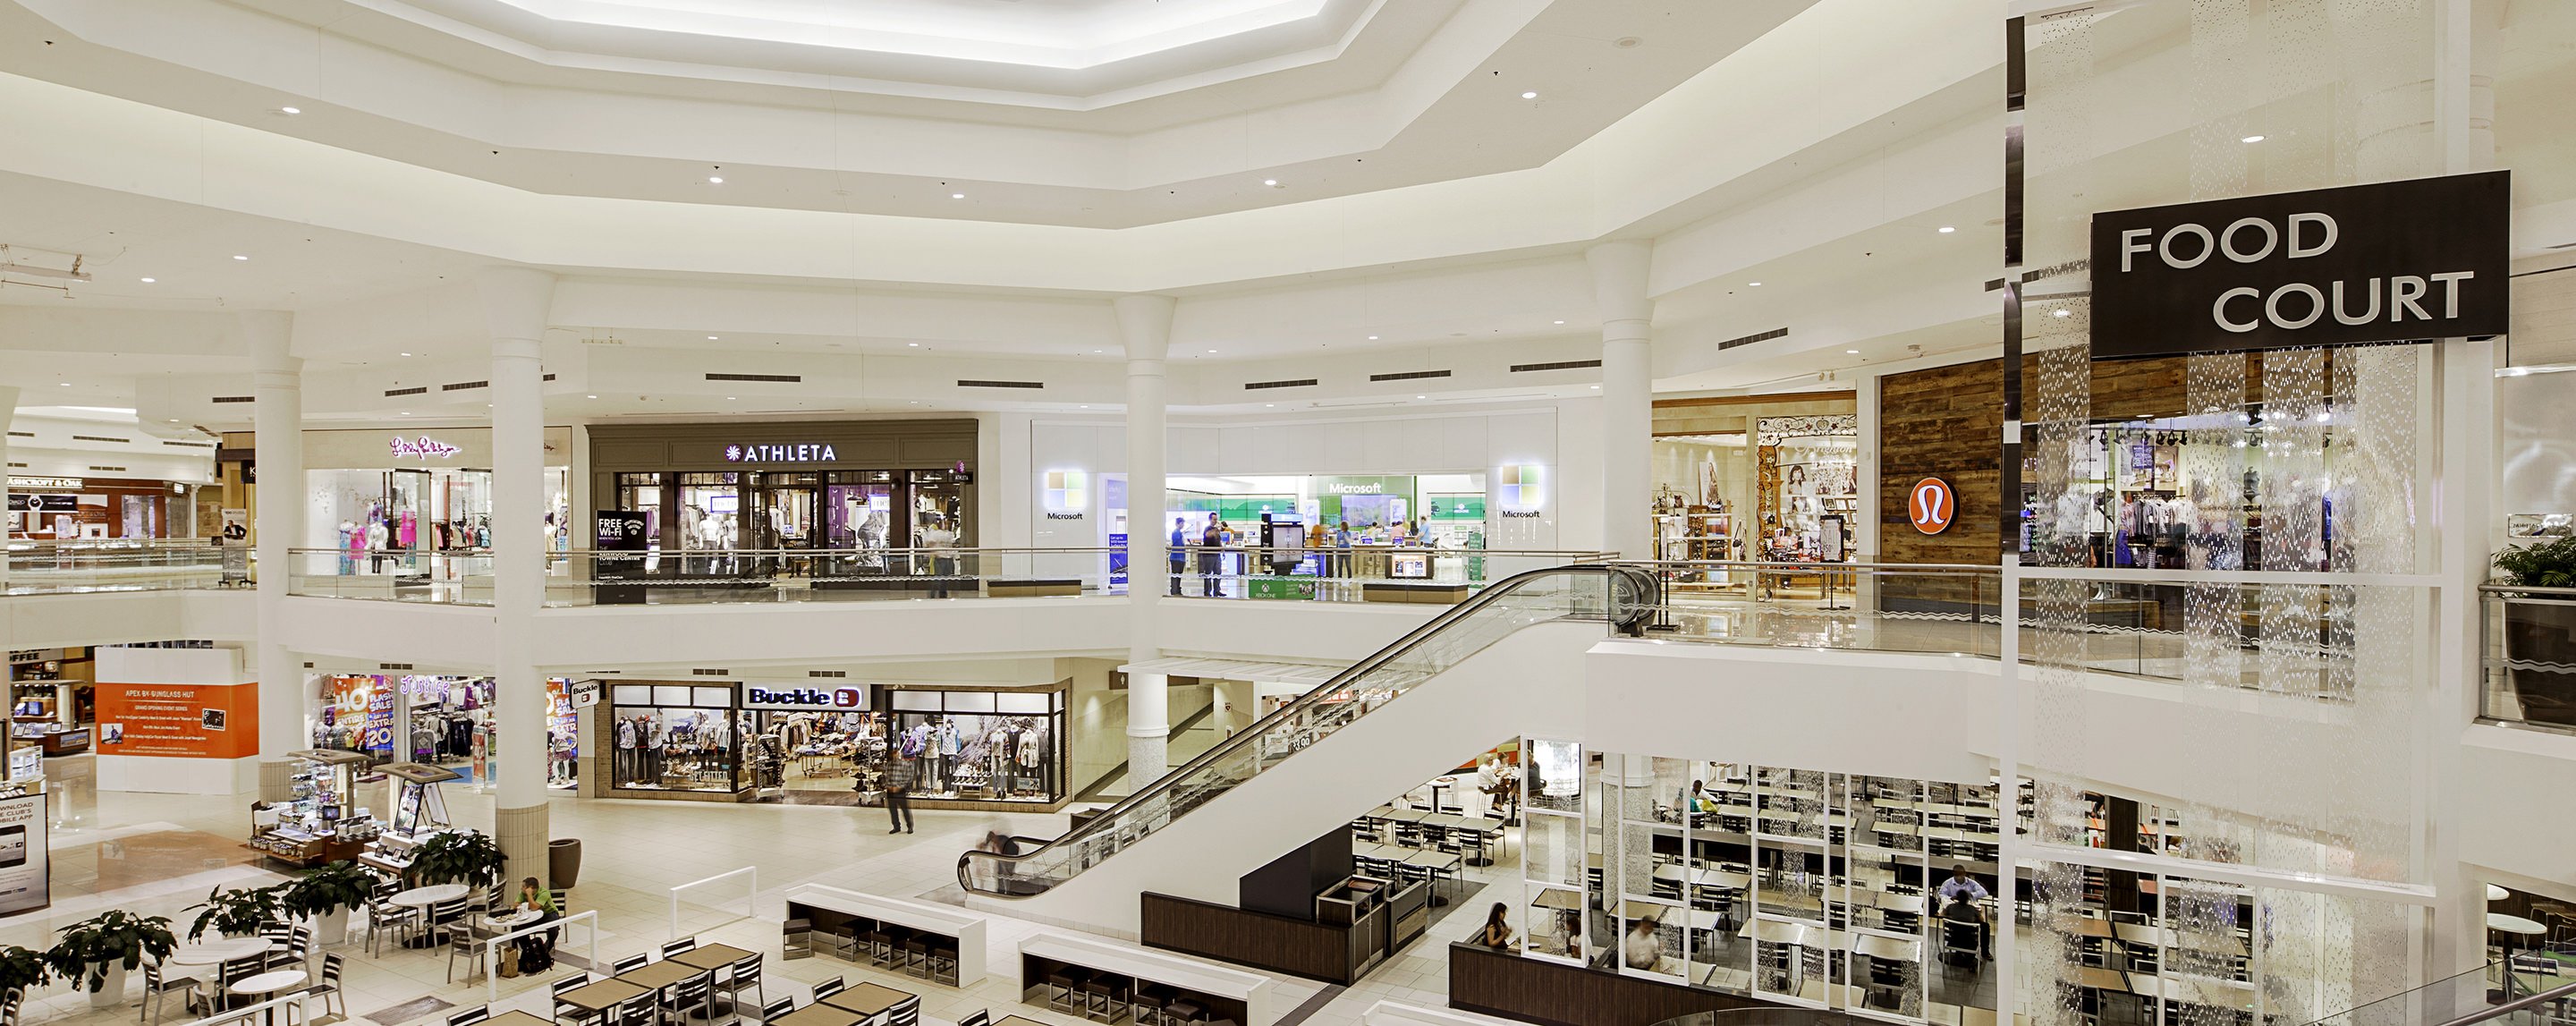 A wide view of an inner area of a two-story mall with Athleta, Lululemon, Buckle, and a Microsoft Store near an escalator.